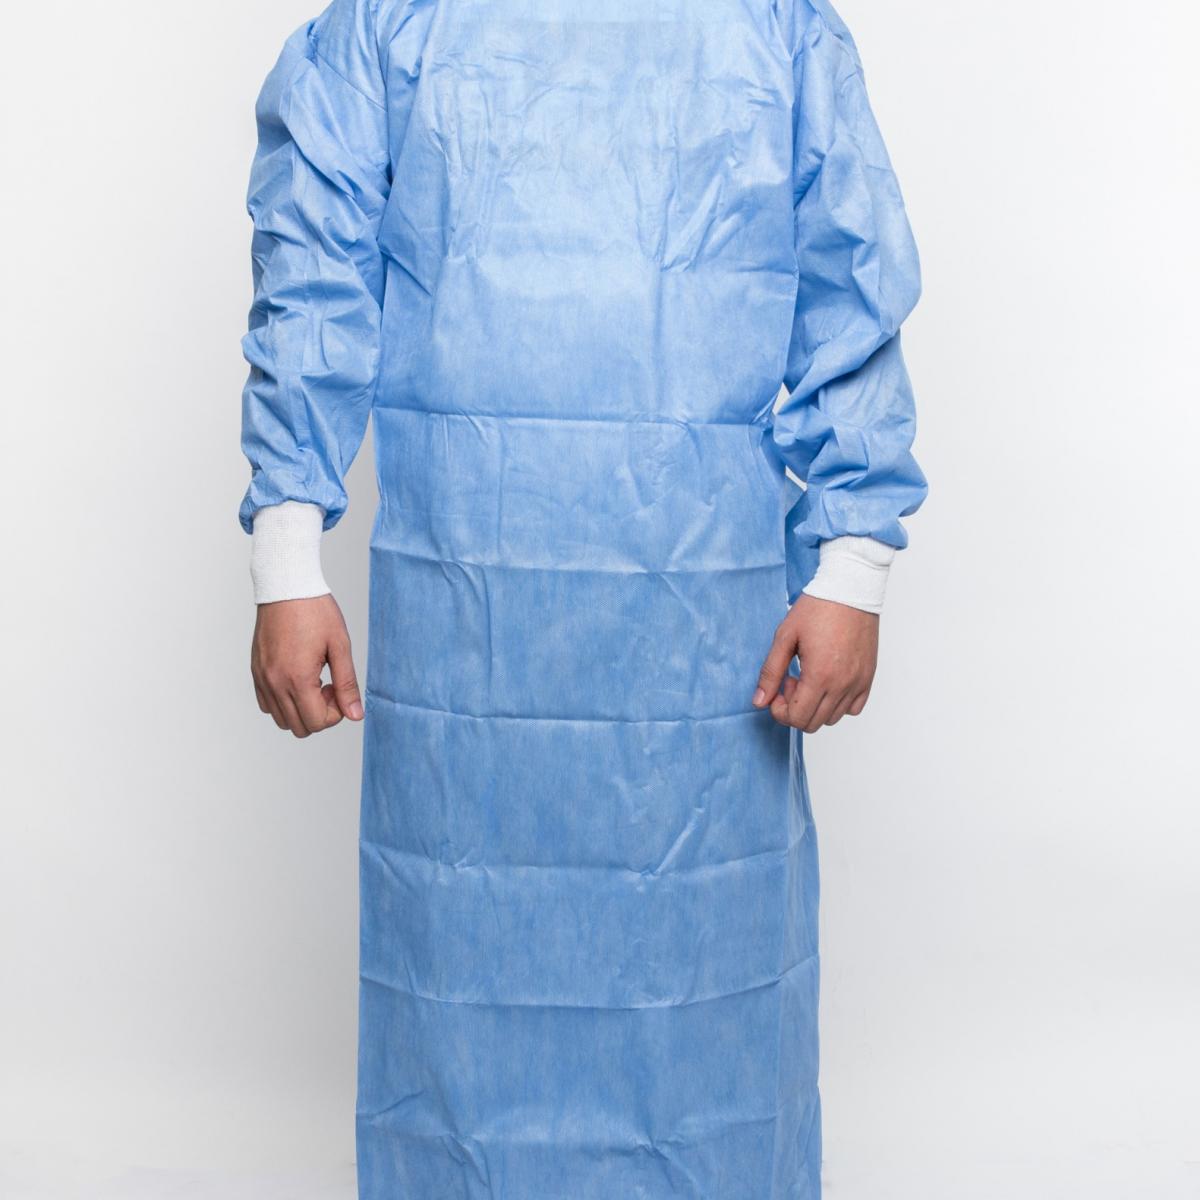 Surgical Gown - Westlab Health